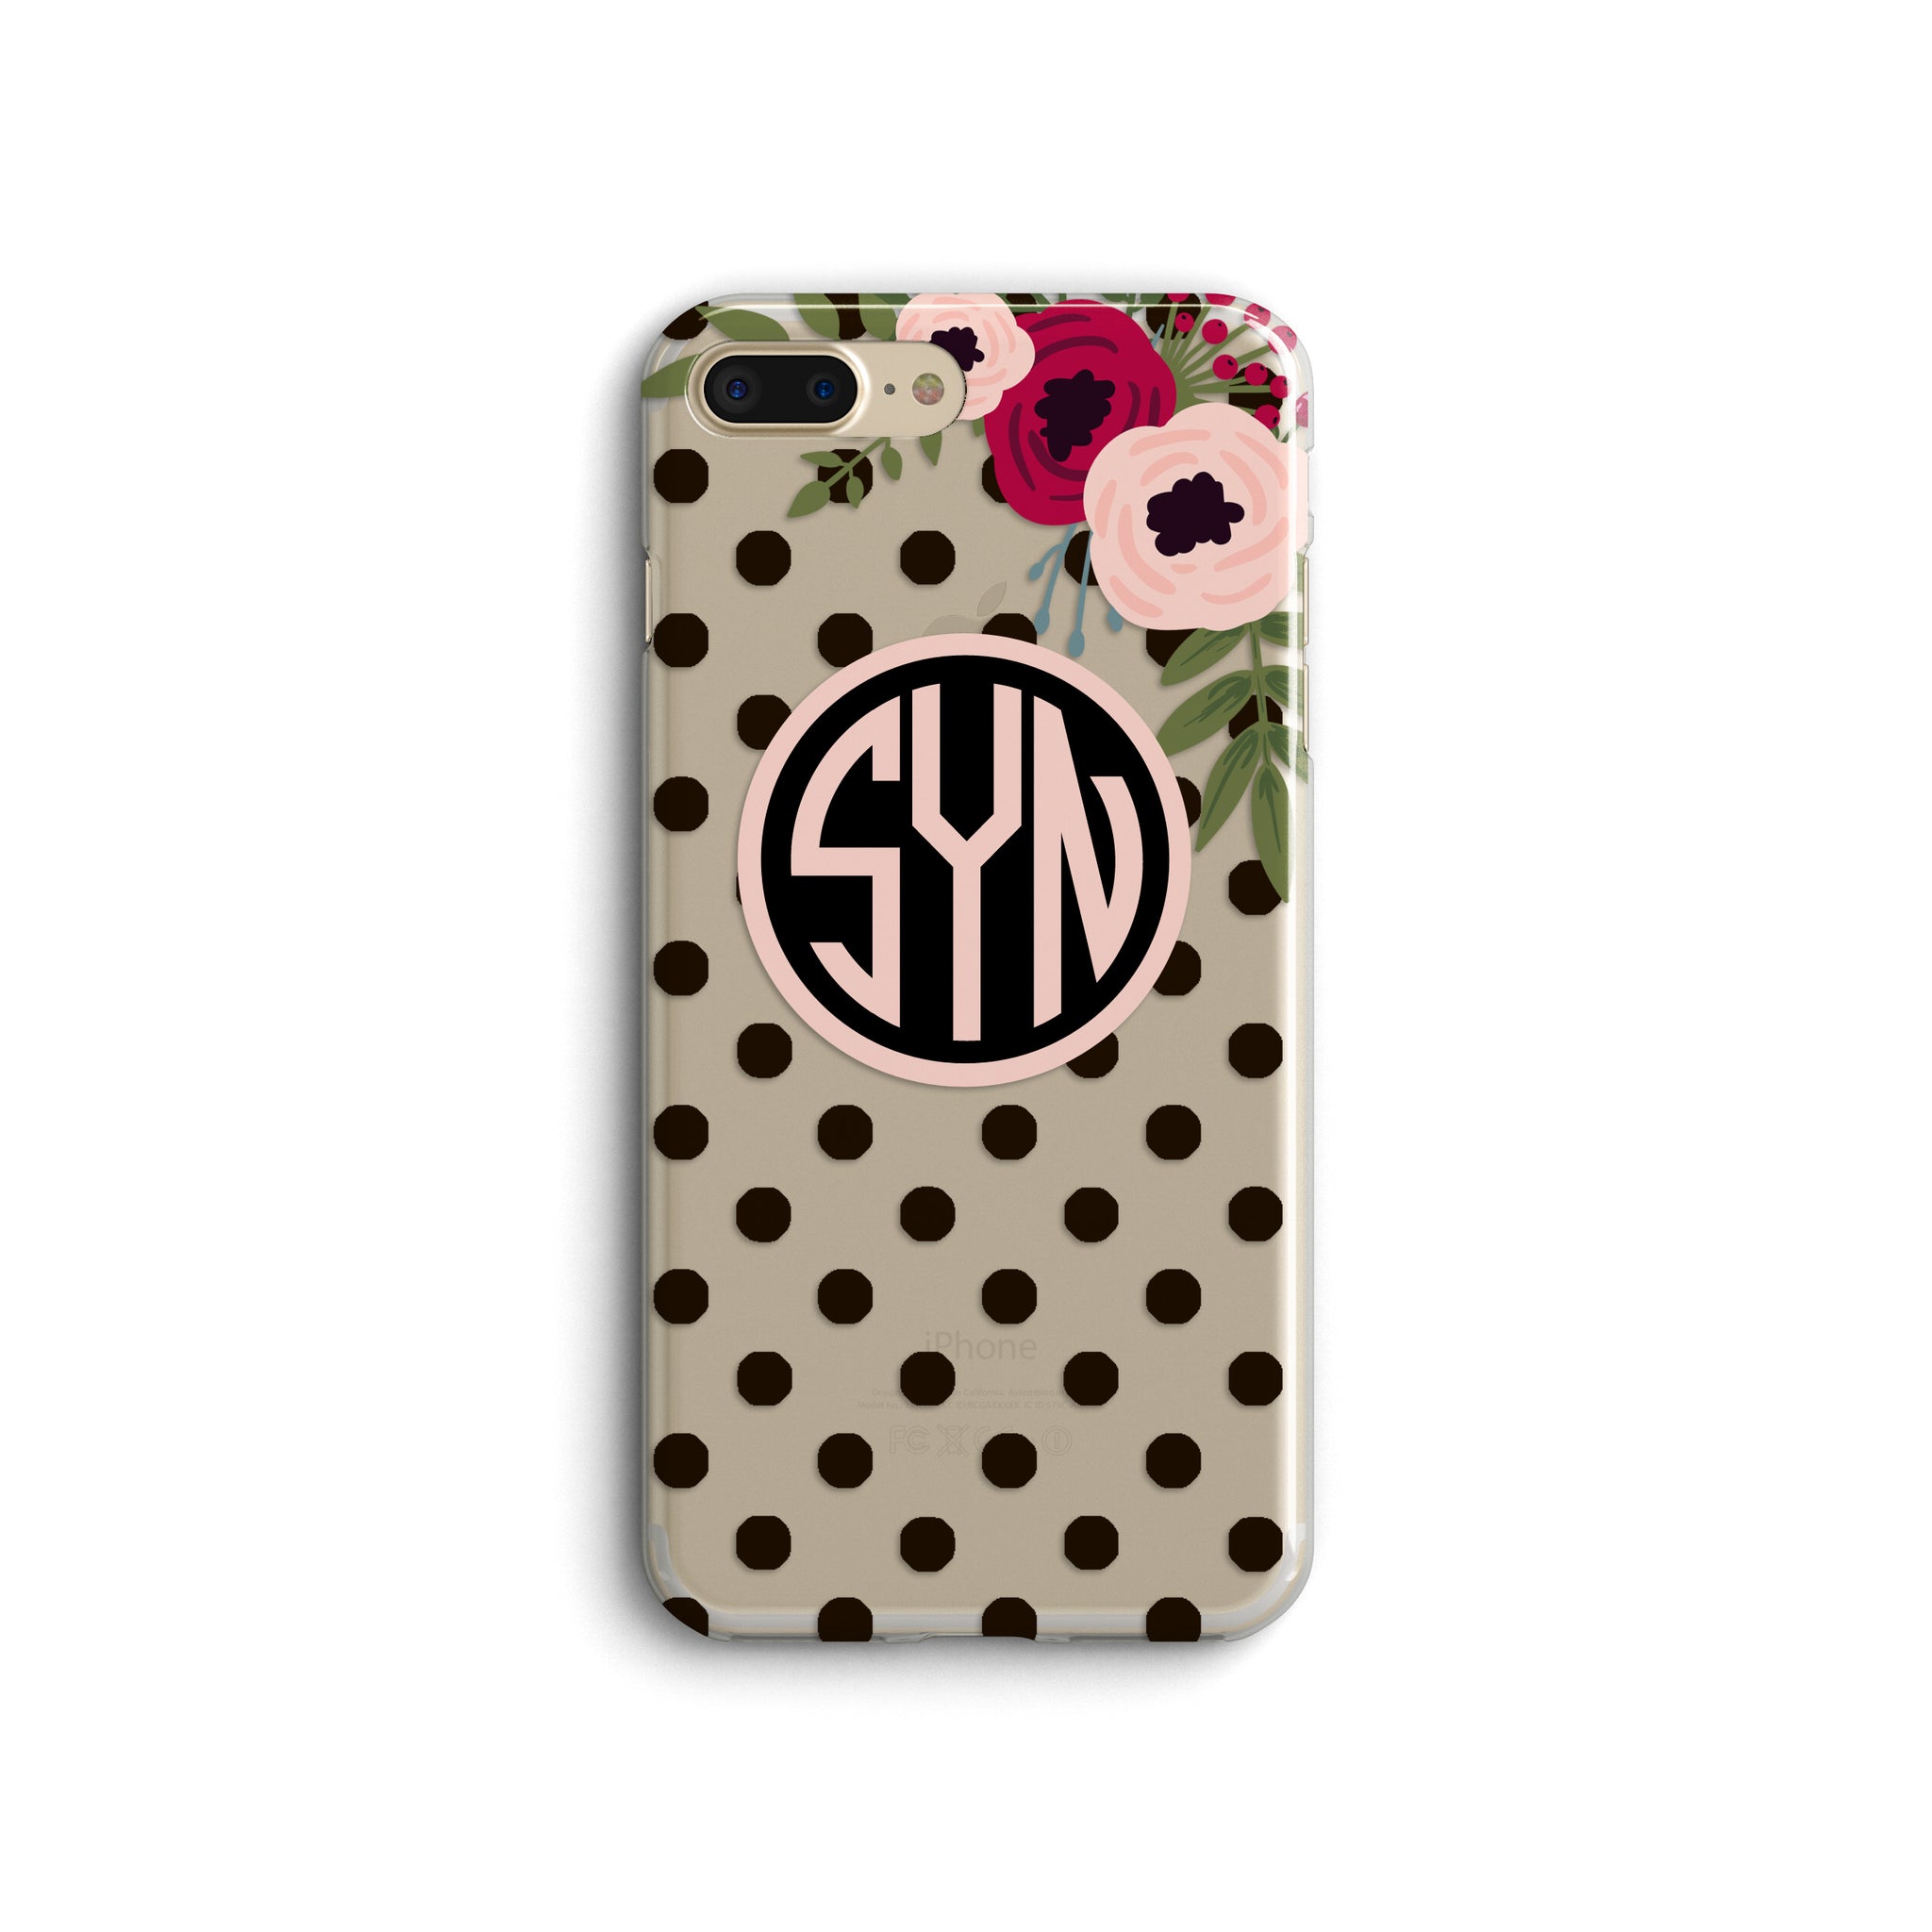 iPhone Case Clear Rubber Samsung Galaxy - Monogram Rose Case